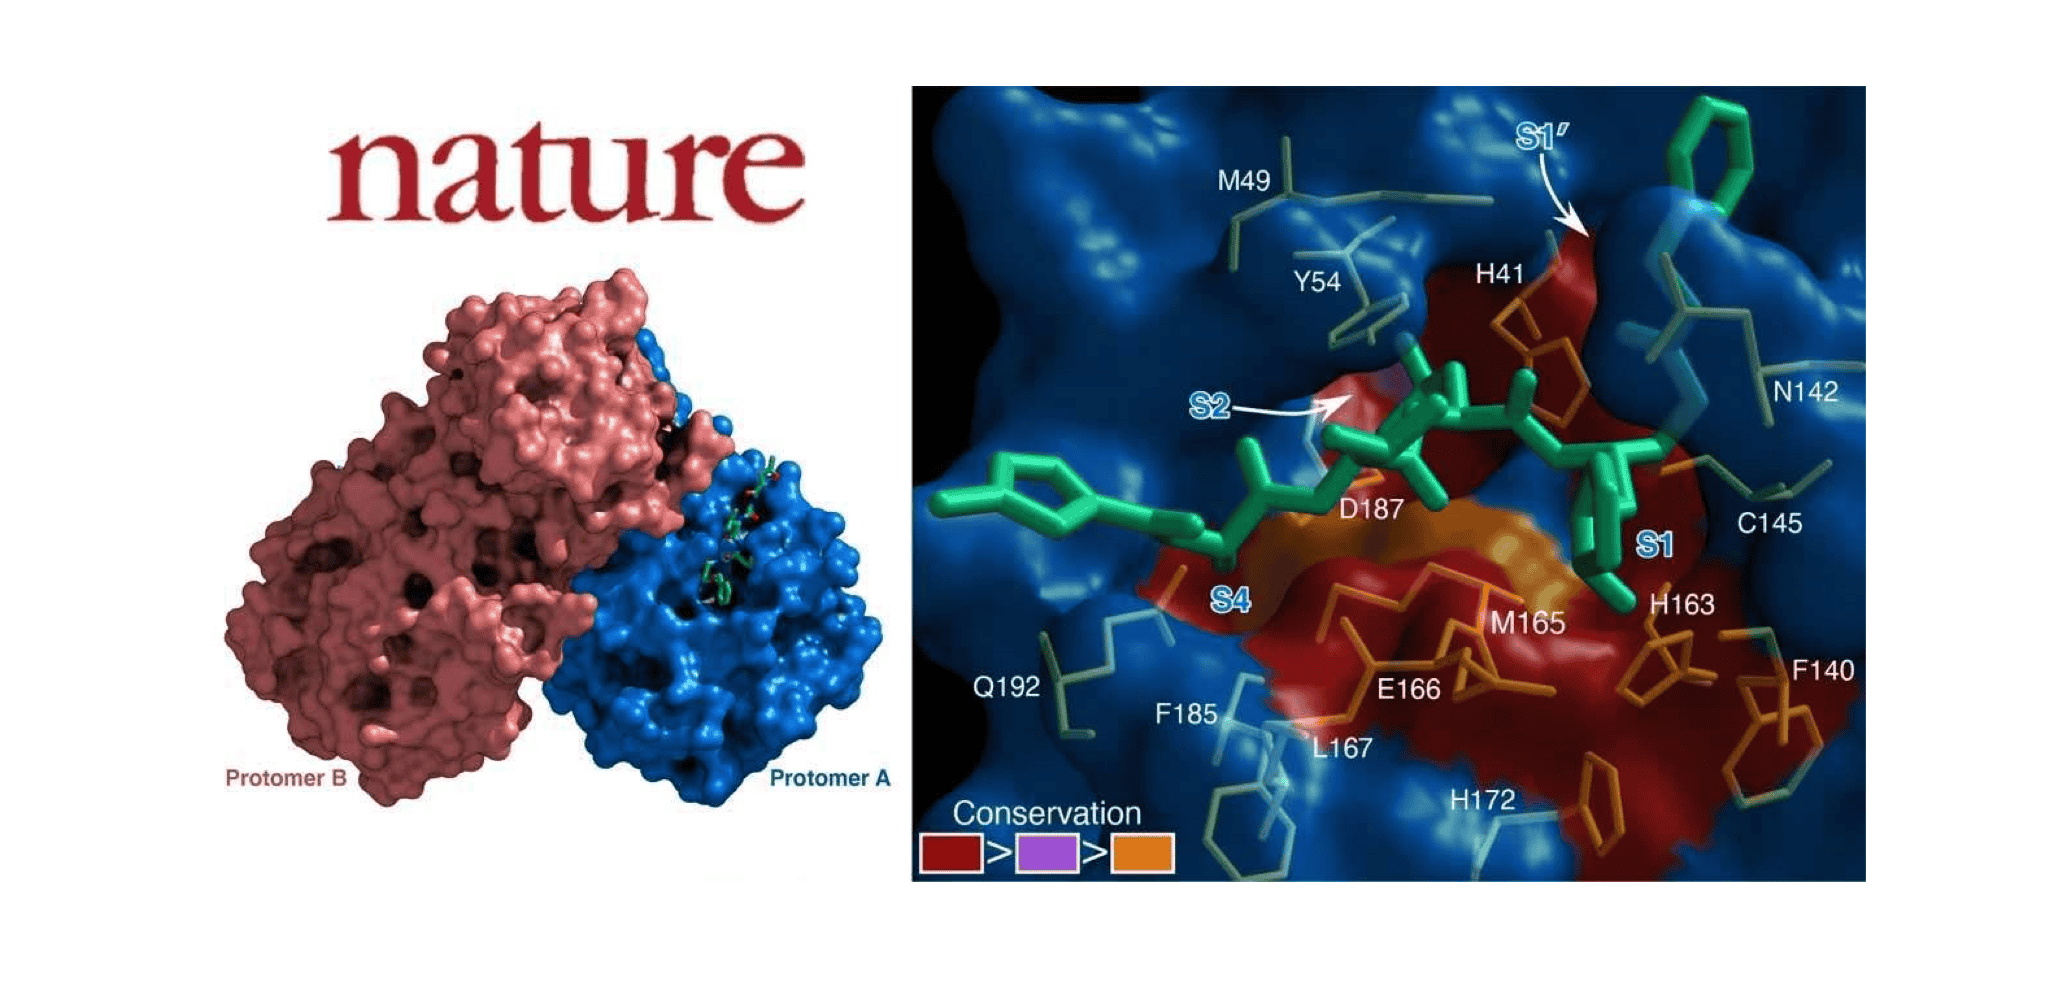 Latest Nature paper on searching COVID-19 drugs cites TargetMol's compound library